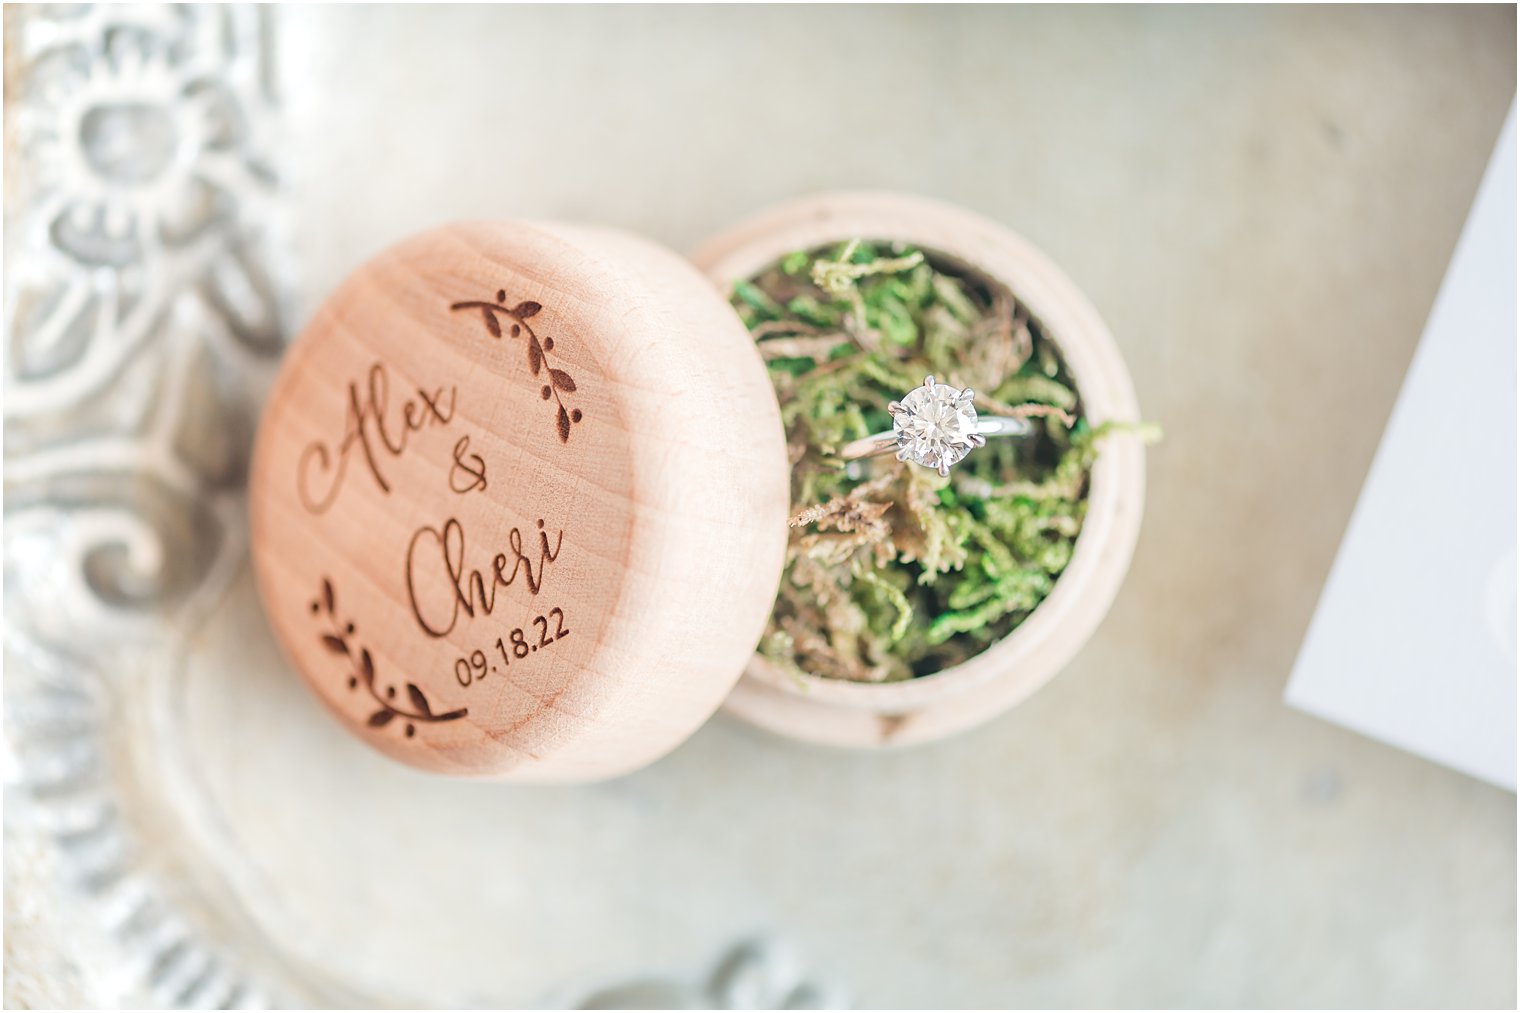 wedding rings rest in wooden box with green grass